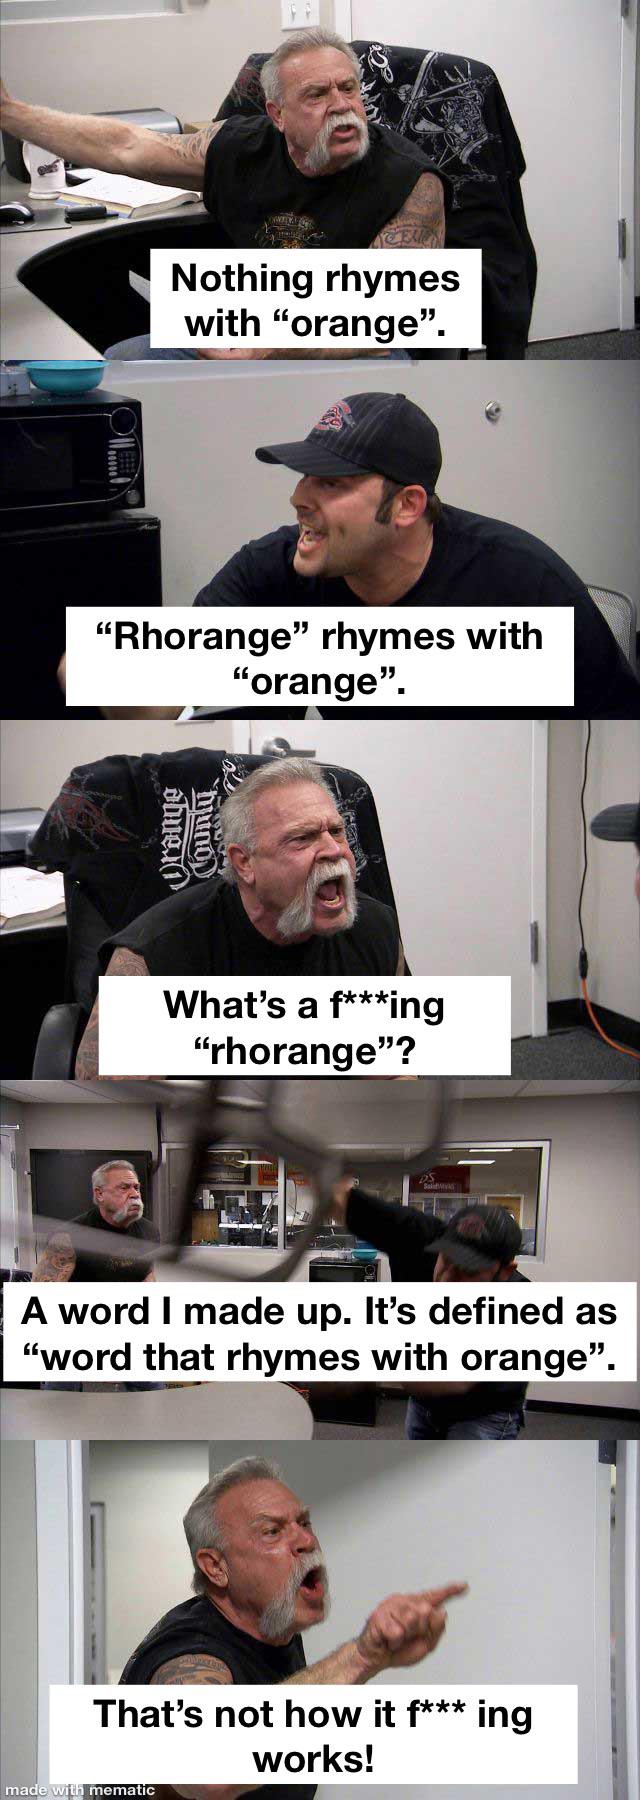 fresh memes - photo caption - Nothing rhymes with "orange". "Rhorange" rhymes with "orange". abwei made with mematic What's a fing "rhorange"? De A word I made up. It's defined as "word that rhymes with orange". That's not how it fing works!